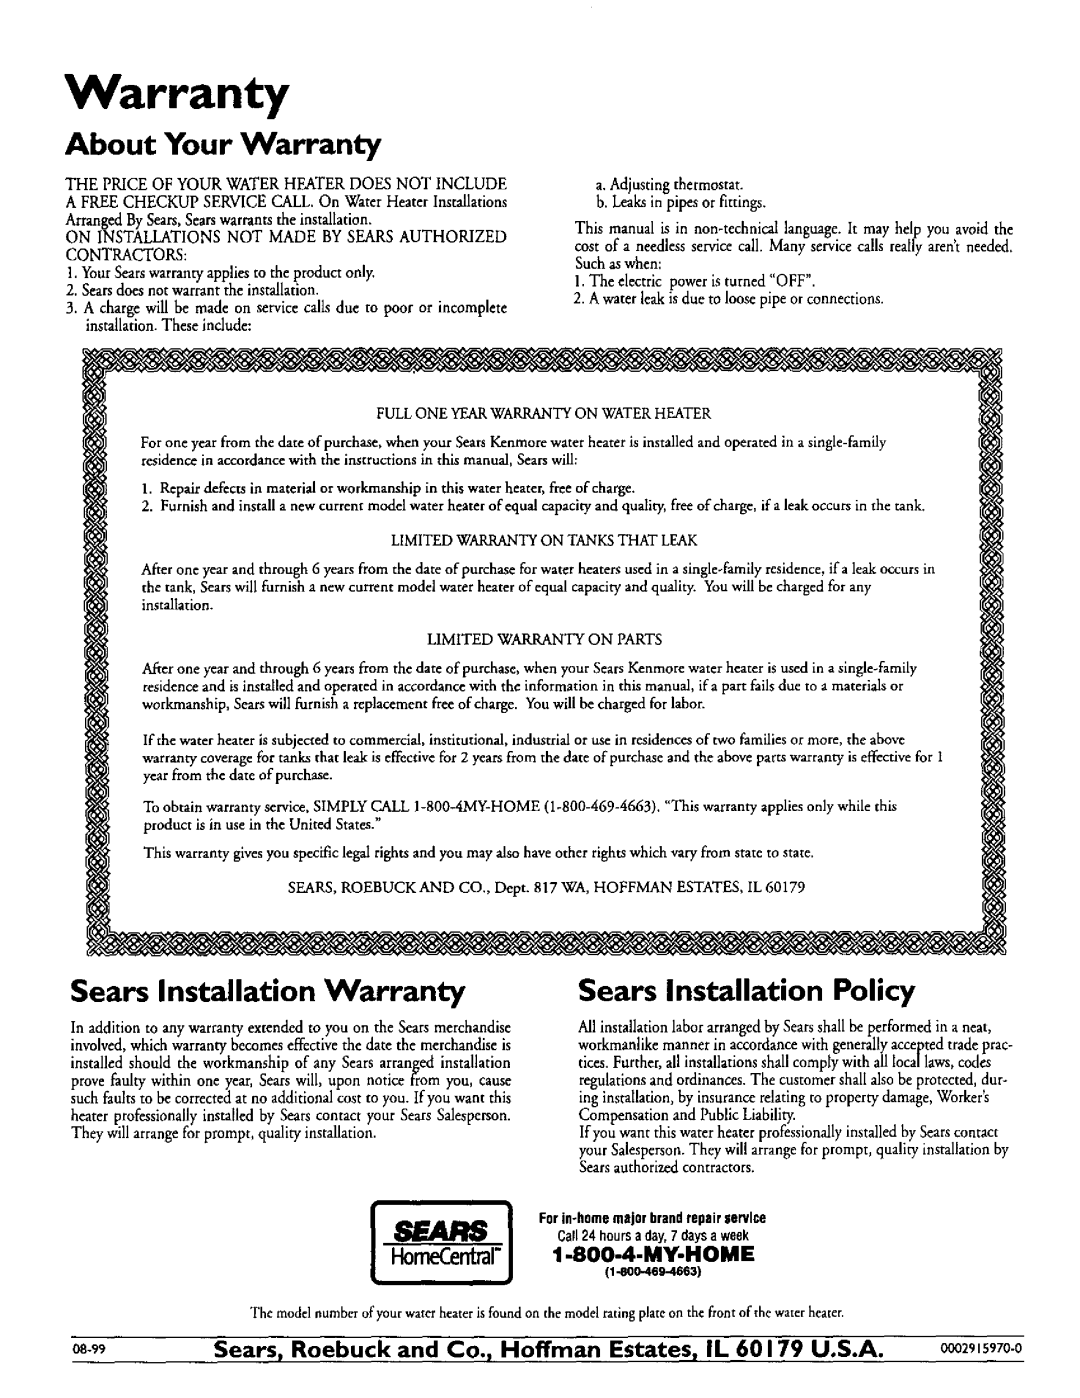 Kenmore 153.316355, 153.316554, 153.316555 About Your Warranty, Sears Installation Warranty, Sears Installation Policy 